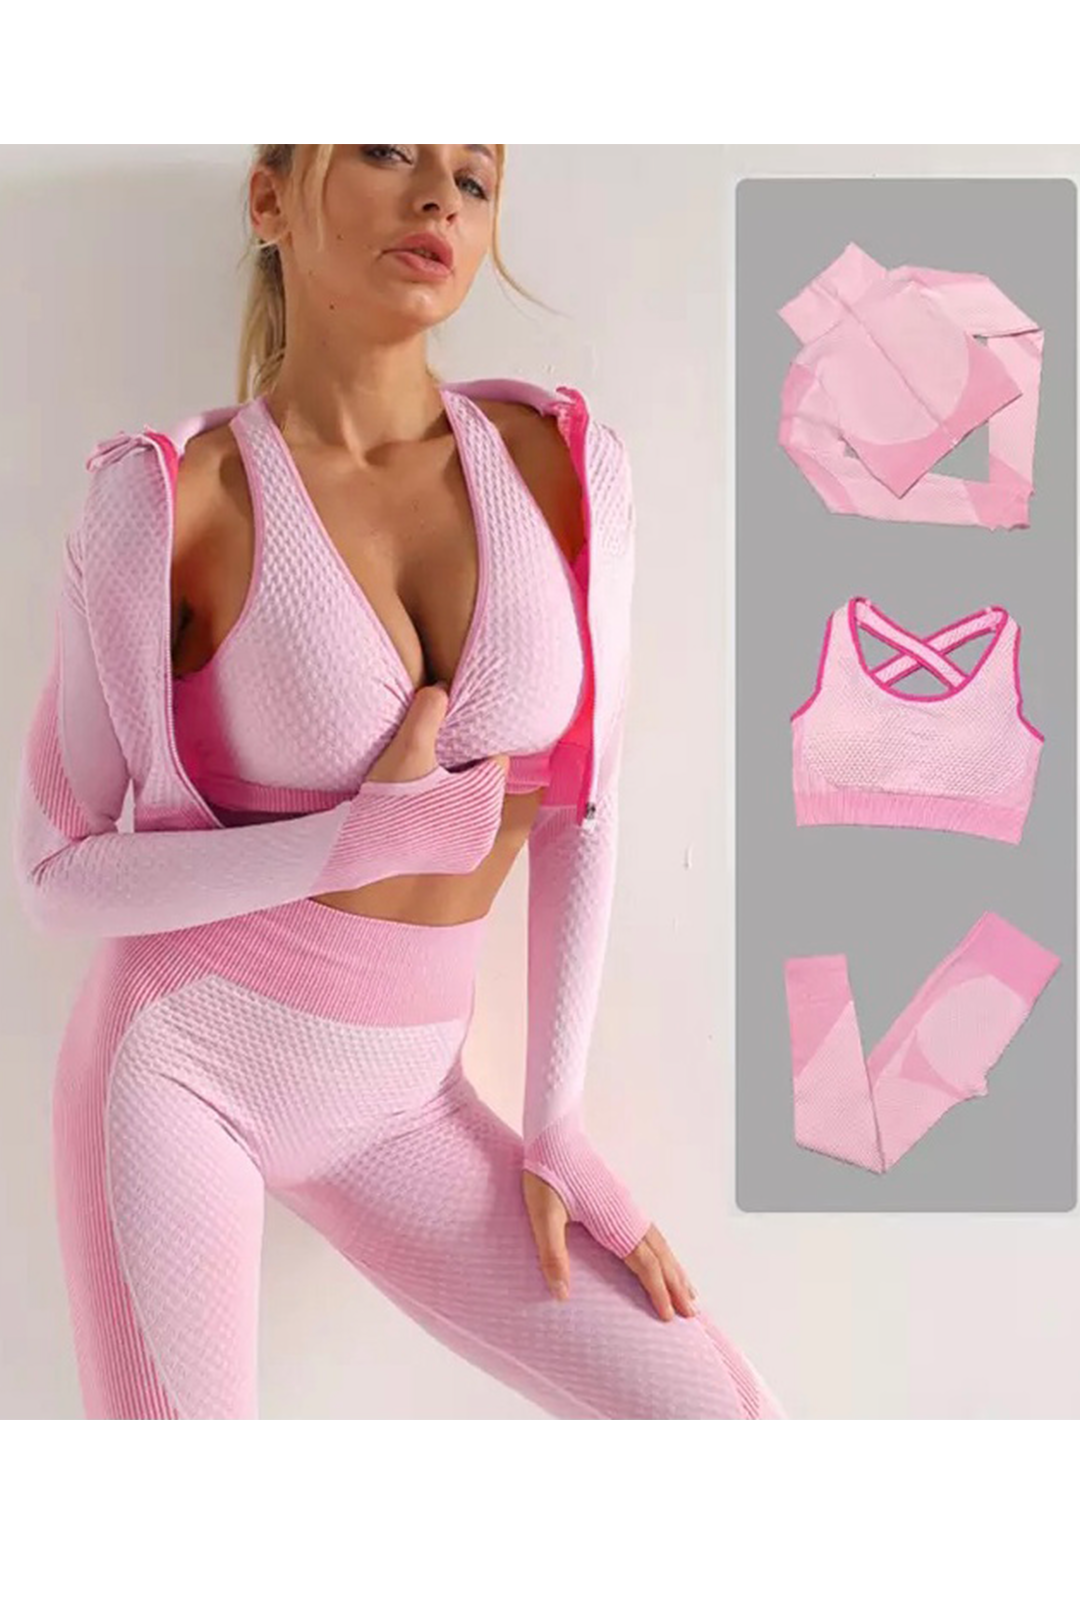 Women's Workout Outfit 3 Pieces Tracksuit-Seamless Hip Lift Yoga Leggings  and Stretch Sports Bra Gym Clothes Set